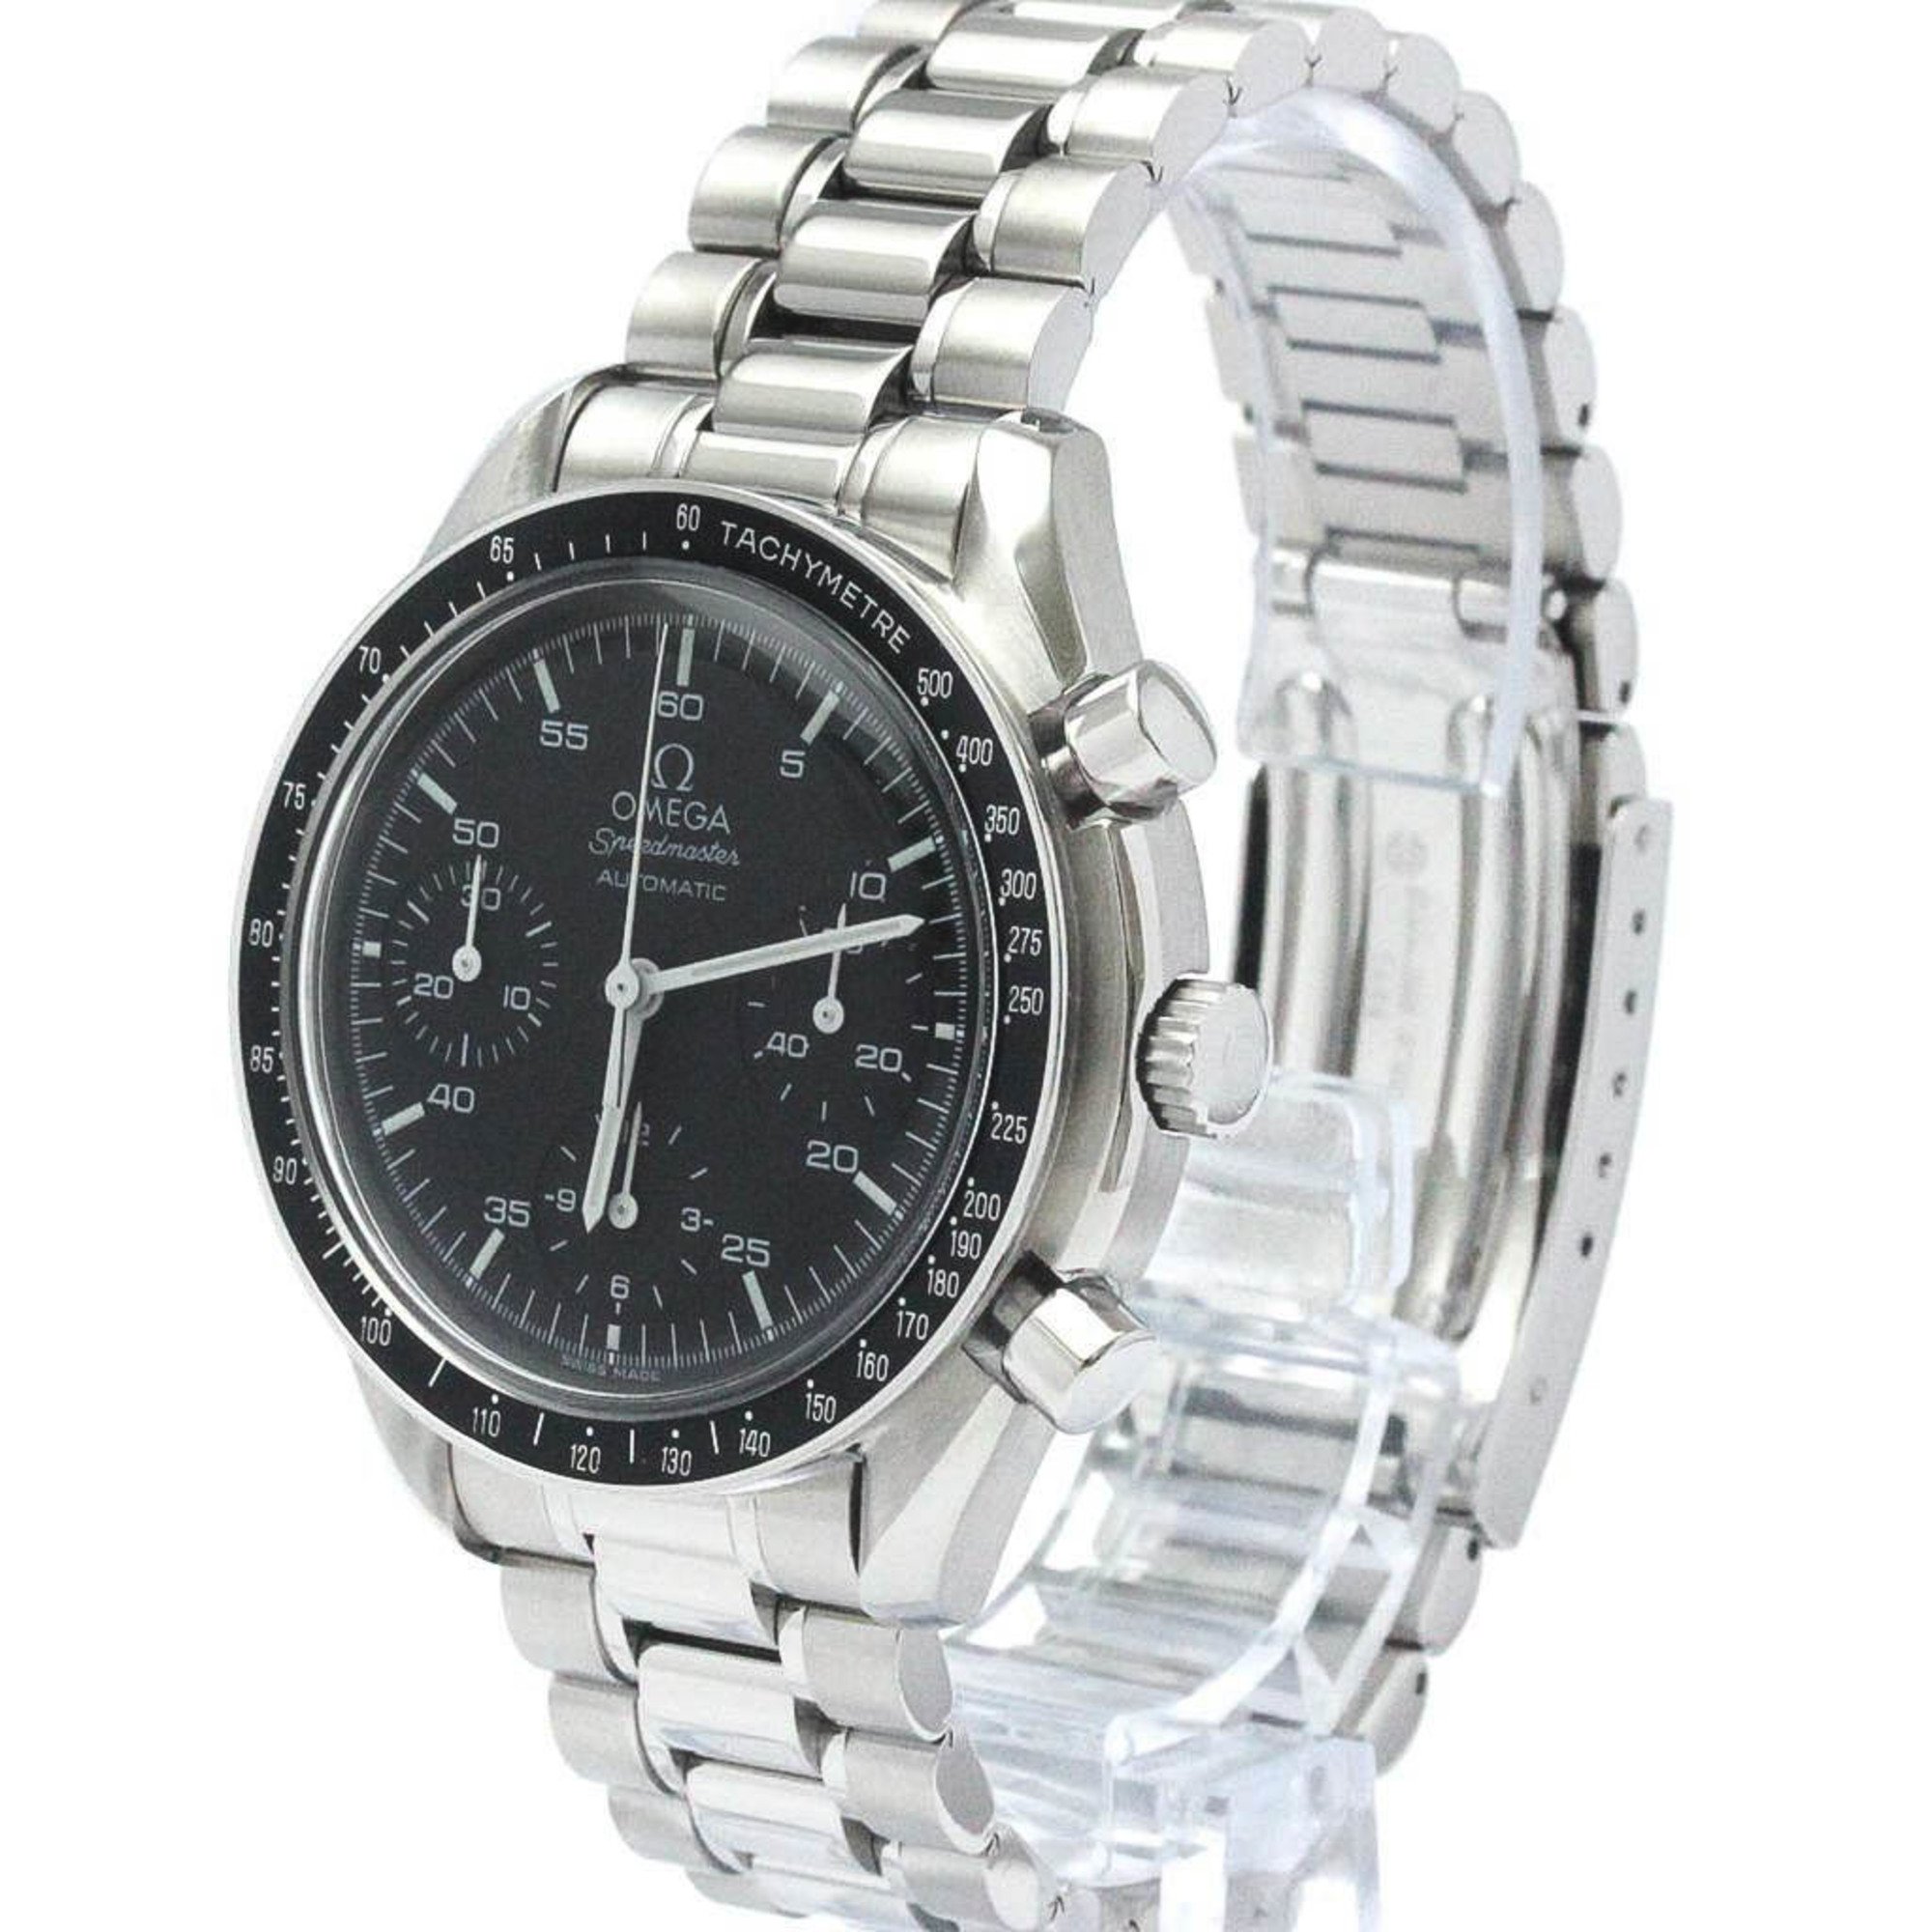 Polished OMEGA Speedmaster Automatic Steel Mens Watch 3510.50 BF567477